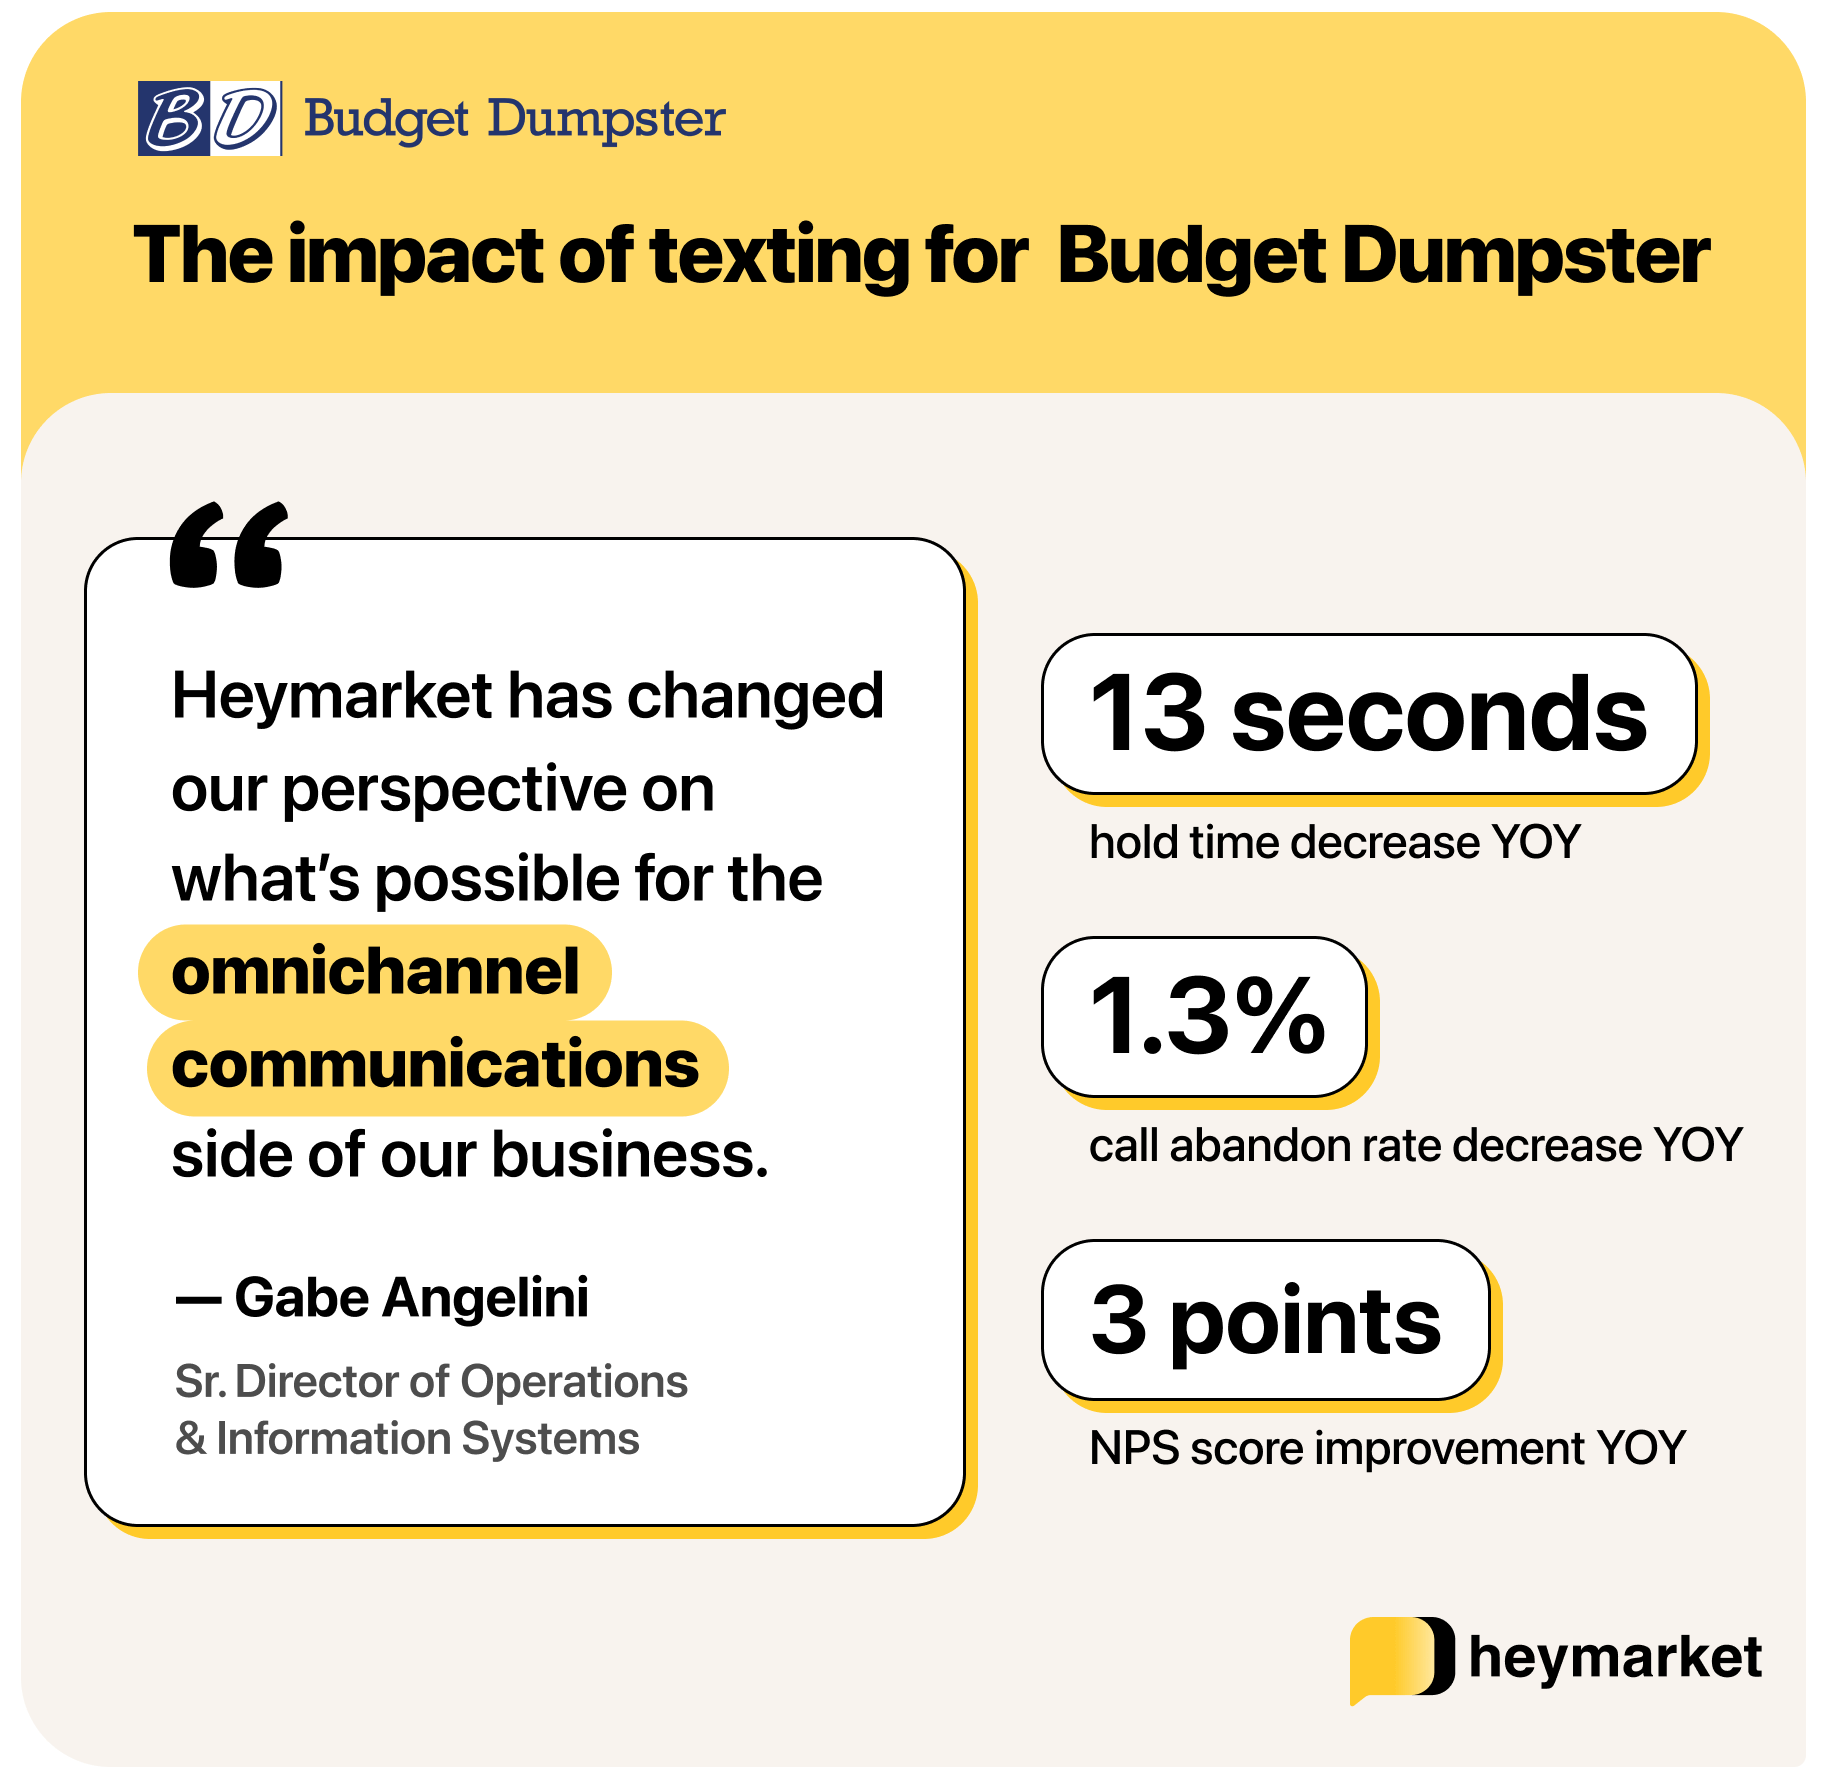 The impact of texting for Budget Dumpster